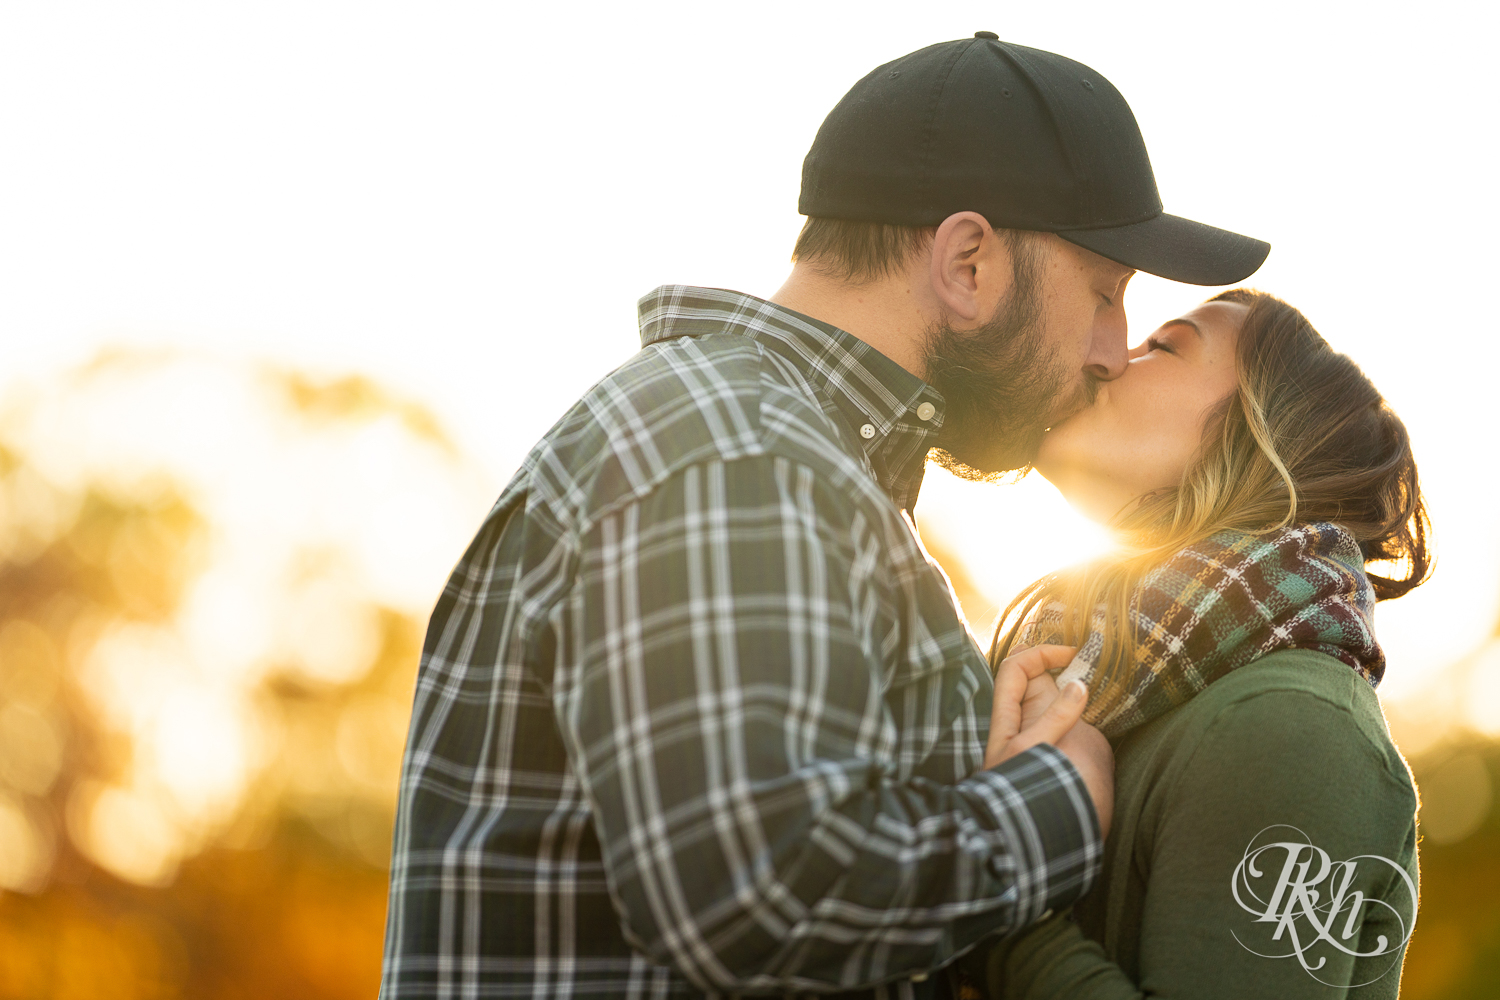 Man in flannel and woman in jeans and sweater kissing during sunset in Eagan, Minnesota.